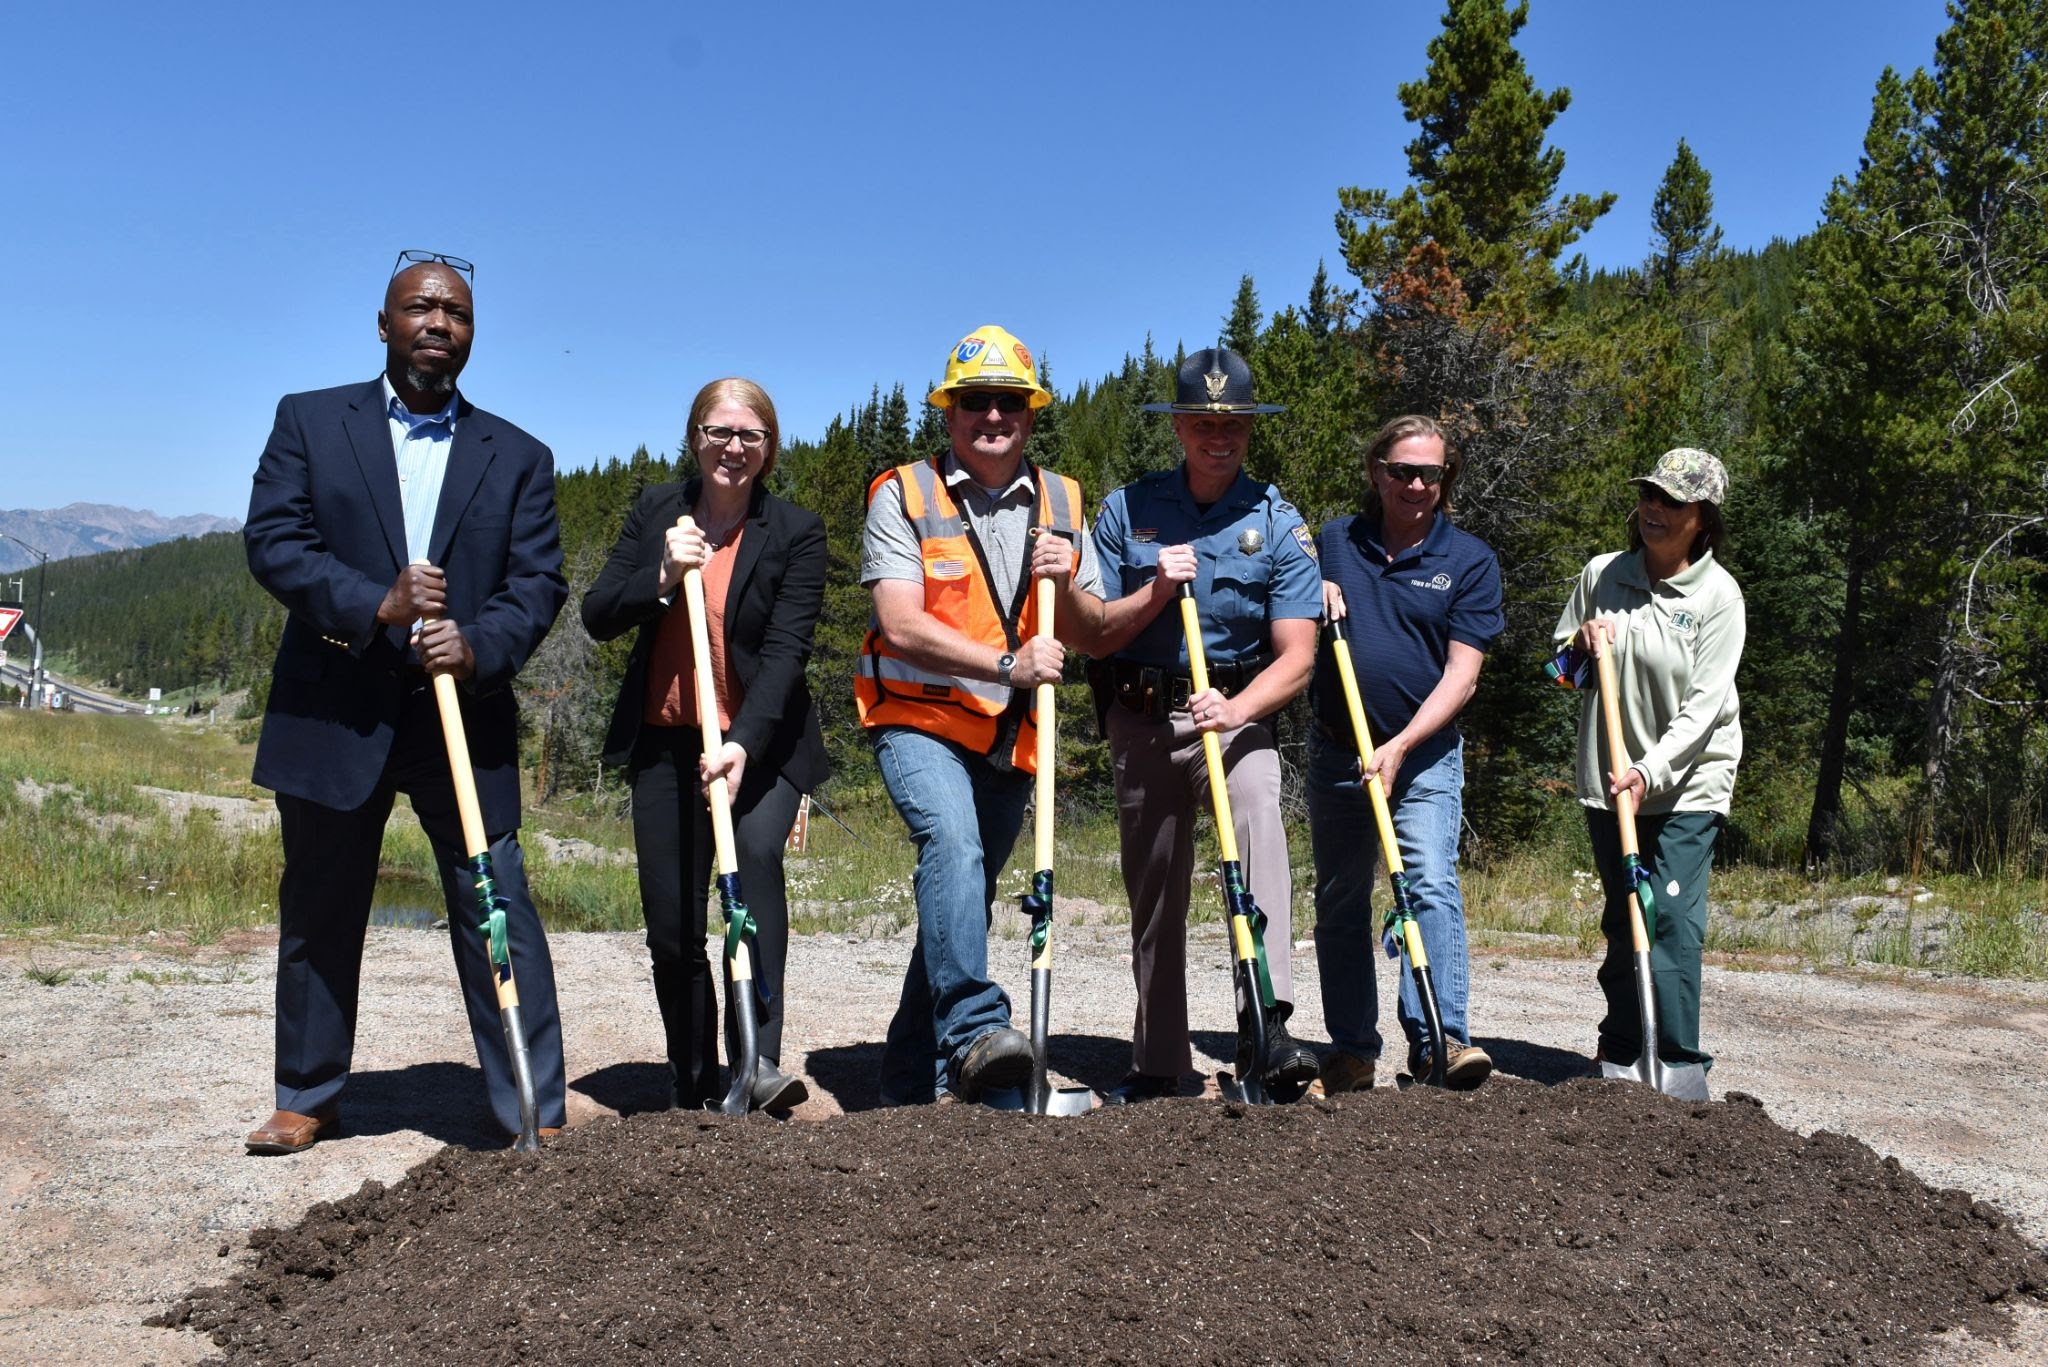 Executive Lew at the groundbreaking of the Vail Pass Auxiliary Lanes project detail image